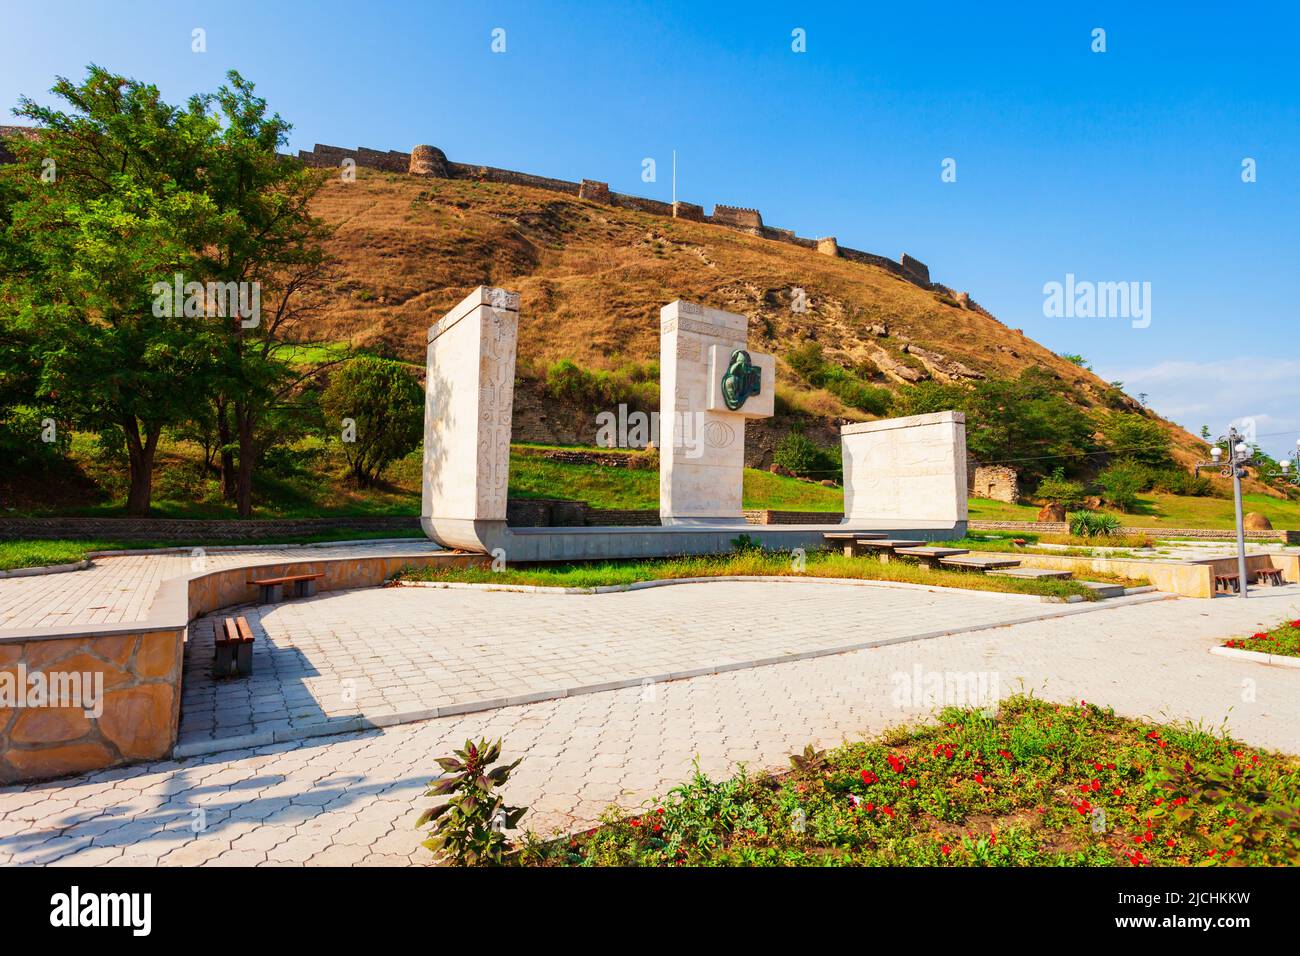 Gori, Georgia - September 01, 2021: Memorial Park near Gori Fortress, Georgia. It is a medieval citadel situated above the city of Gori on a rocky hil Stock Photo